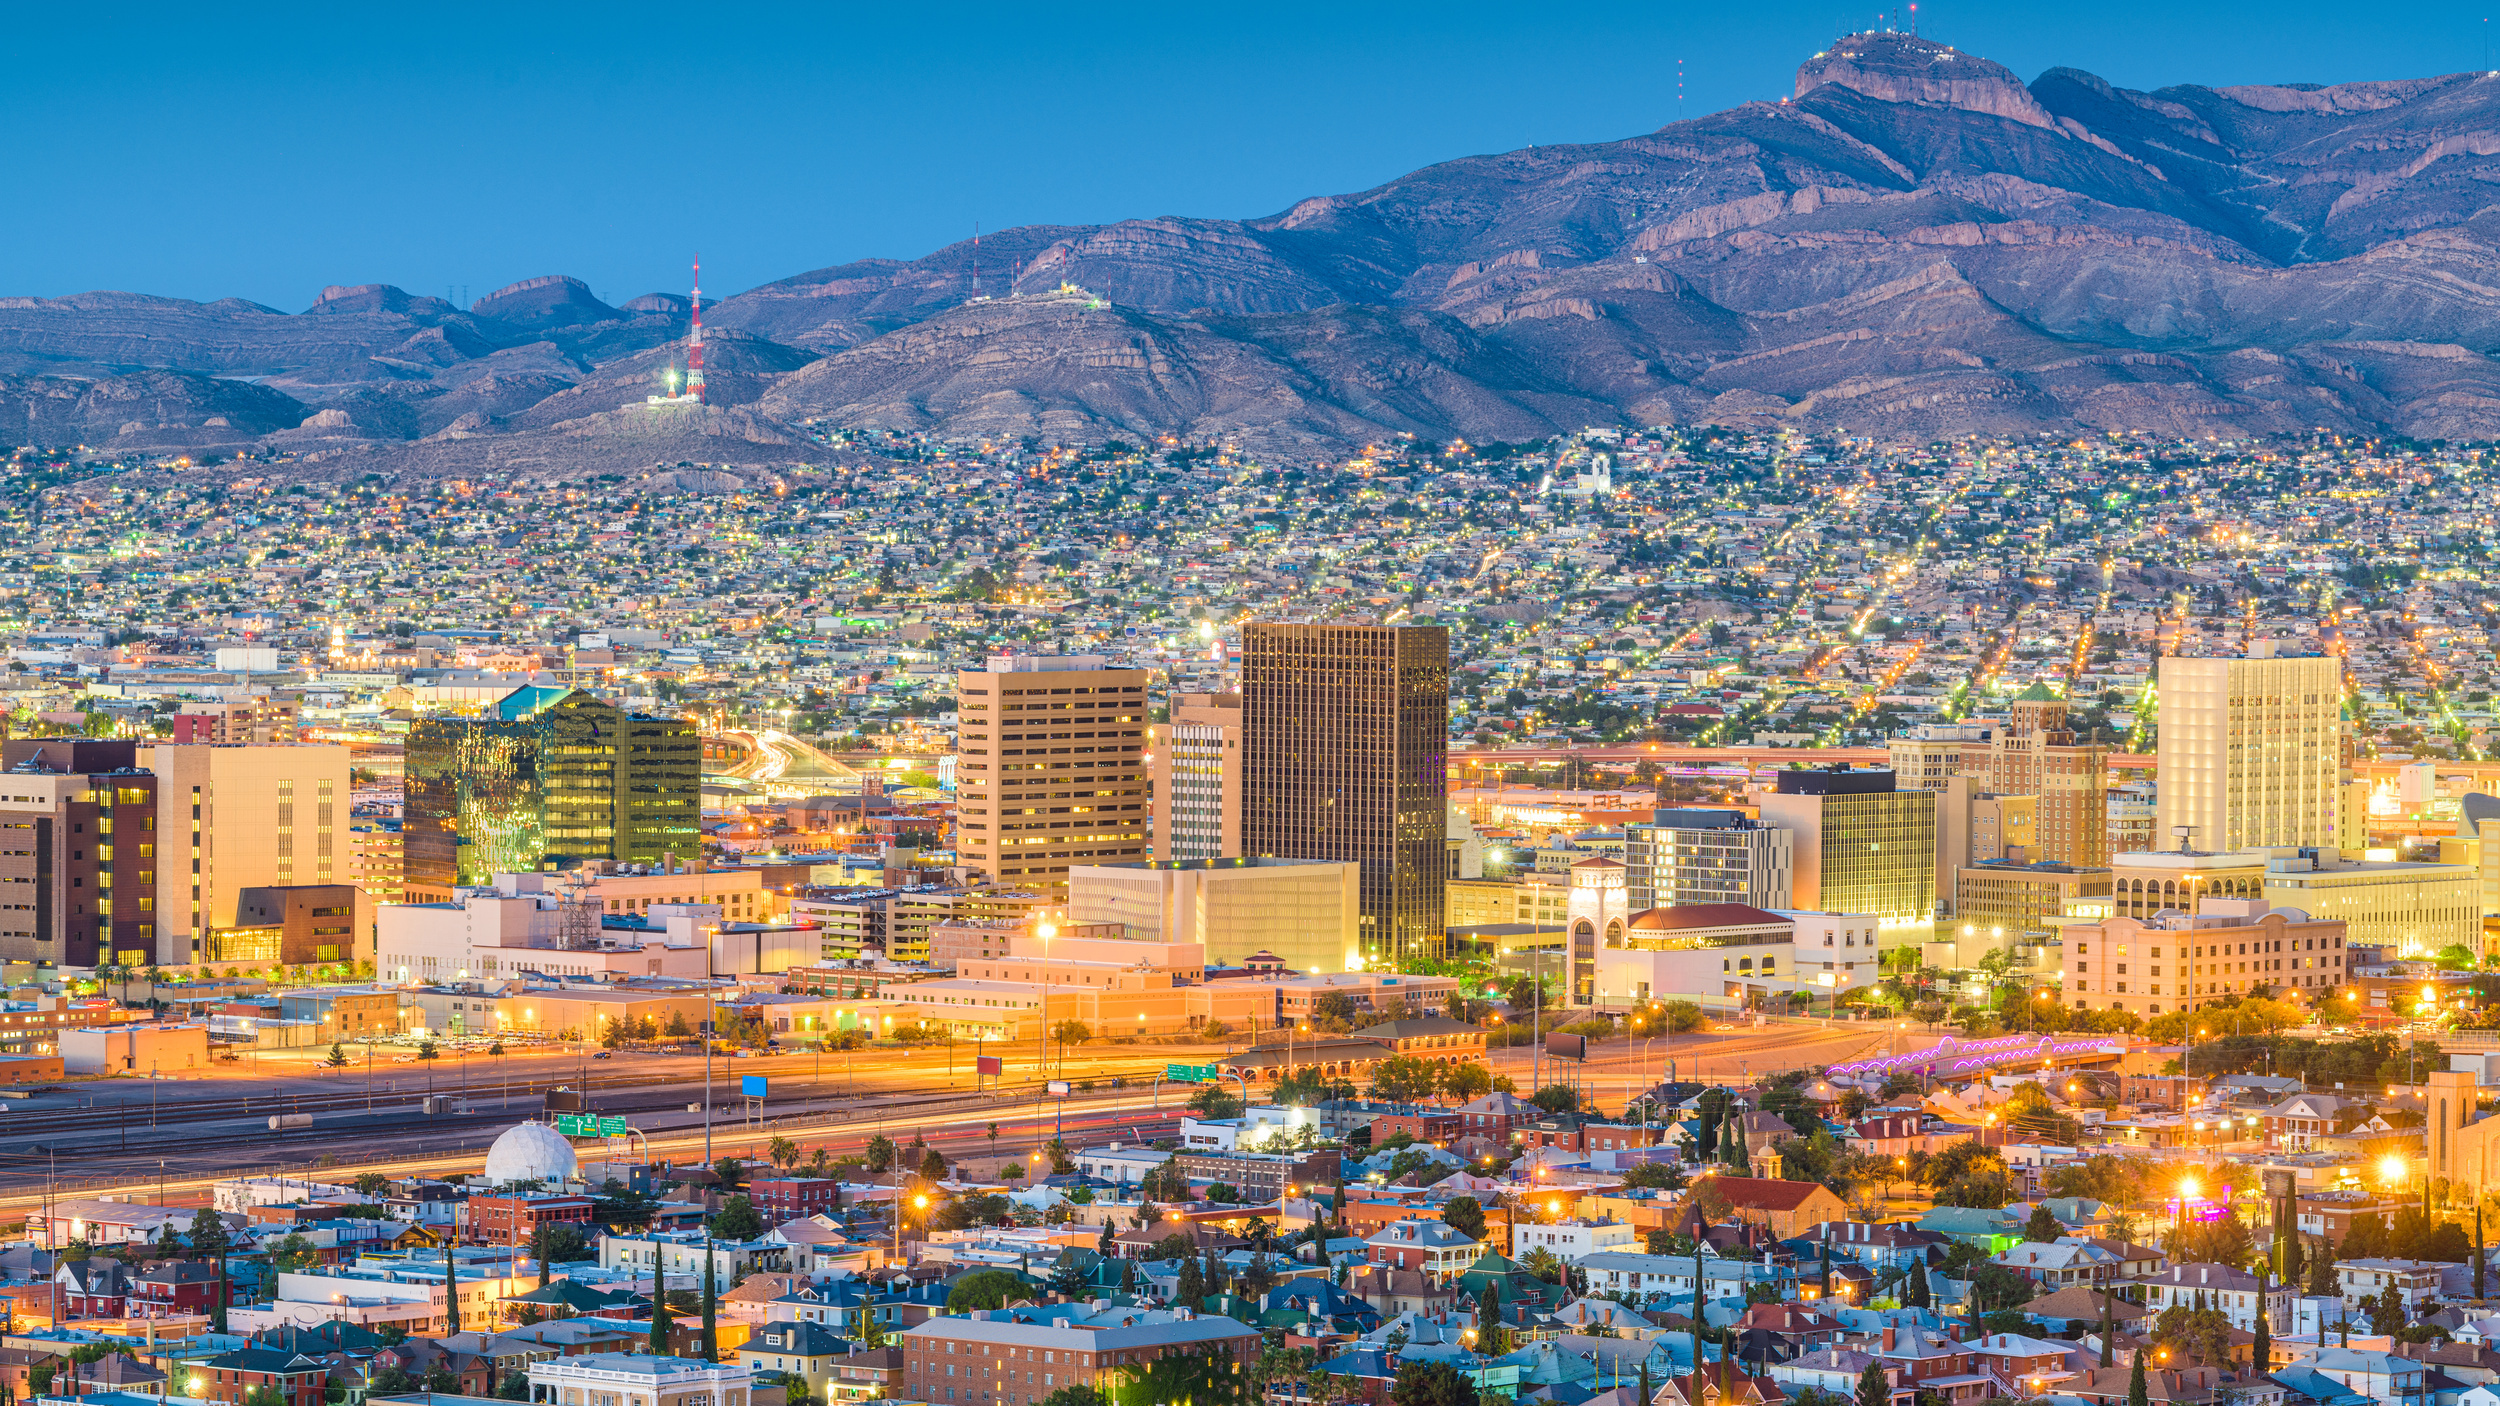 <p>Located right on the border, El Paso, Texas, offers a marriage of cultures, and it's evident in its exciting nightlife. The locals might suggest checking out Pride Square or Union Plaza if you're new to the area, but if you do some digging on your own, you'll likely find a hidden gem. </p><p>You may also like: <a href='https://www.yardbarker.com/lifestyle/articles/13_foods_drinks_that_cause_bad_breath_and_13_that_combat_it_040924/s1__36110171'>13 foods & drinks that cause bad breath and 13 that combat it</a></p>